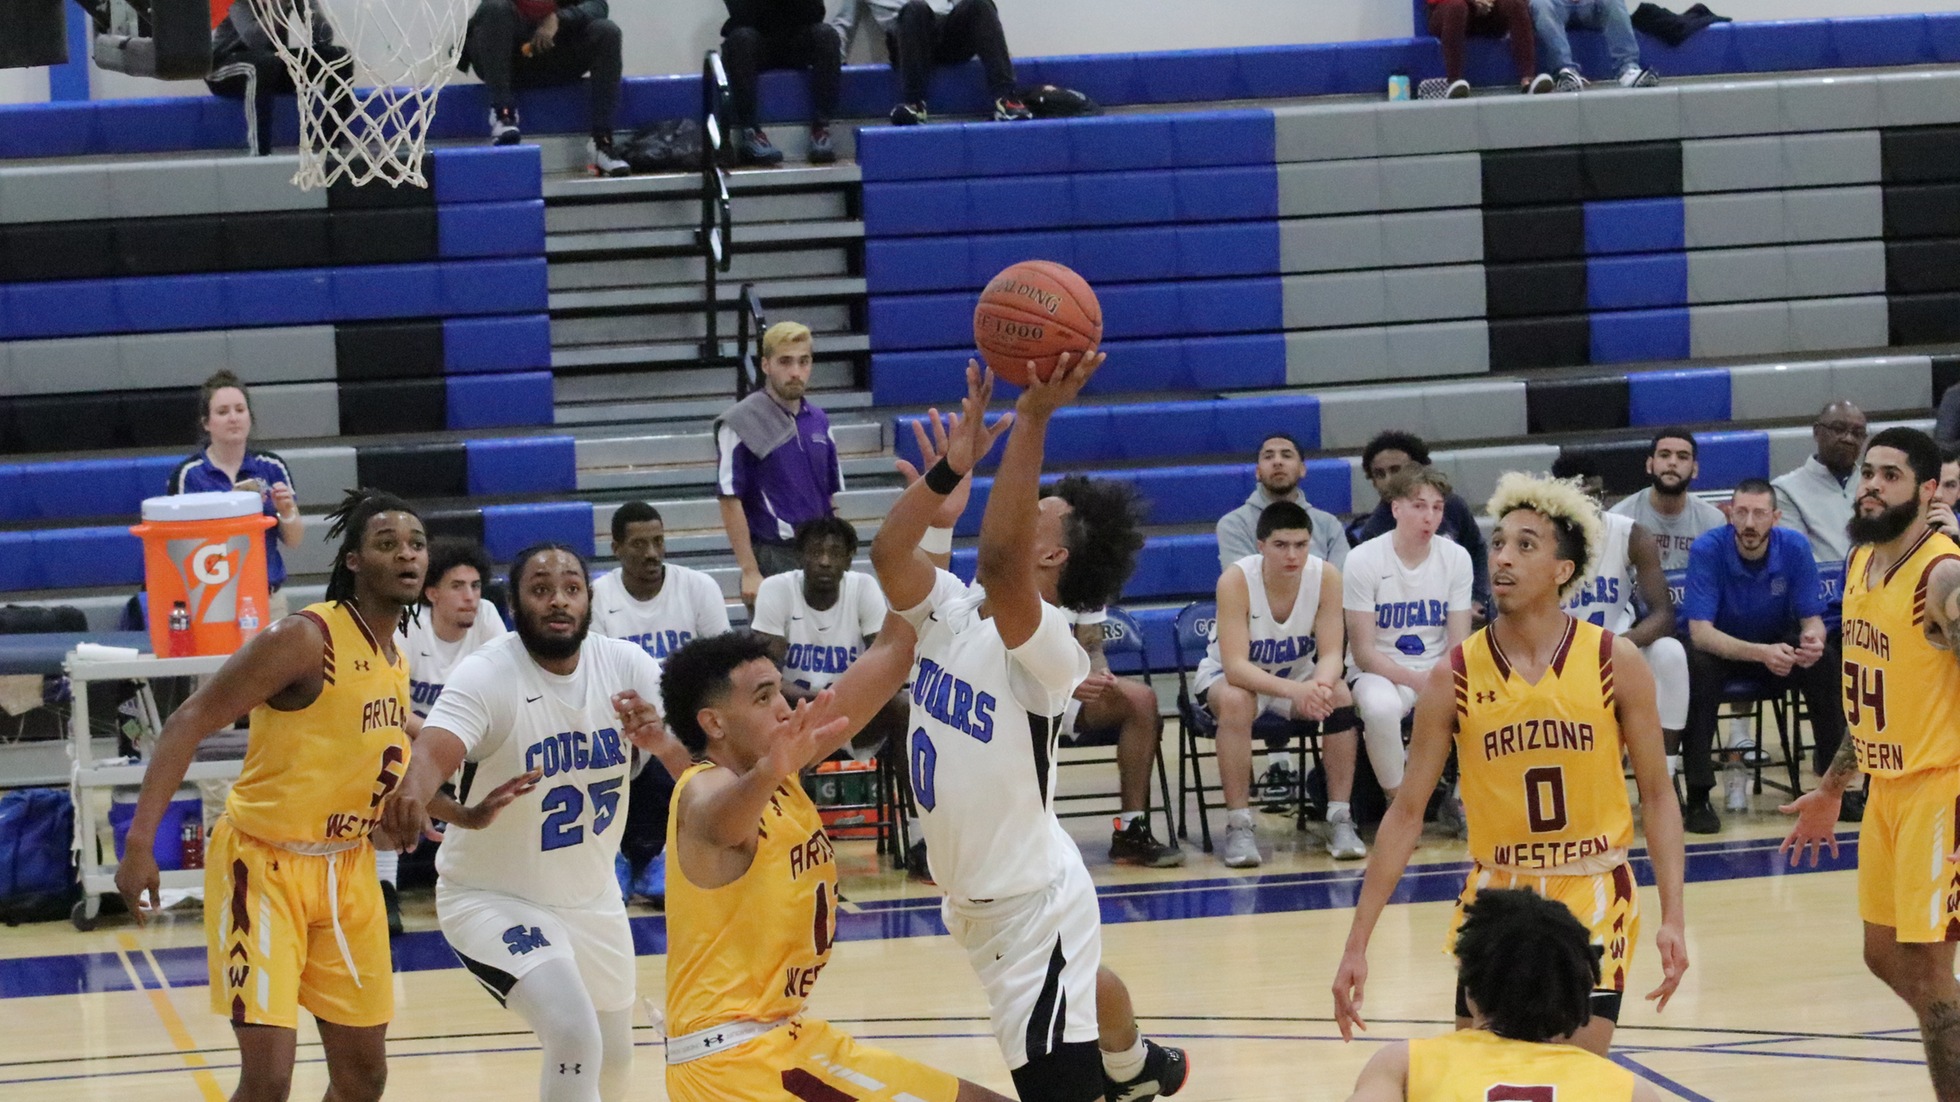 SMCC Men’s Hoops Defeats Tohono O’odham CC in ACCAC Action